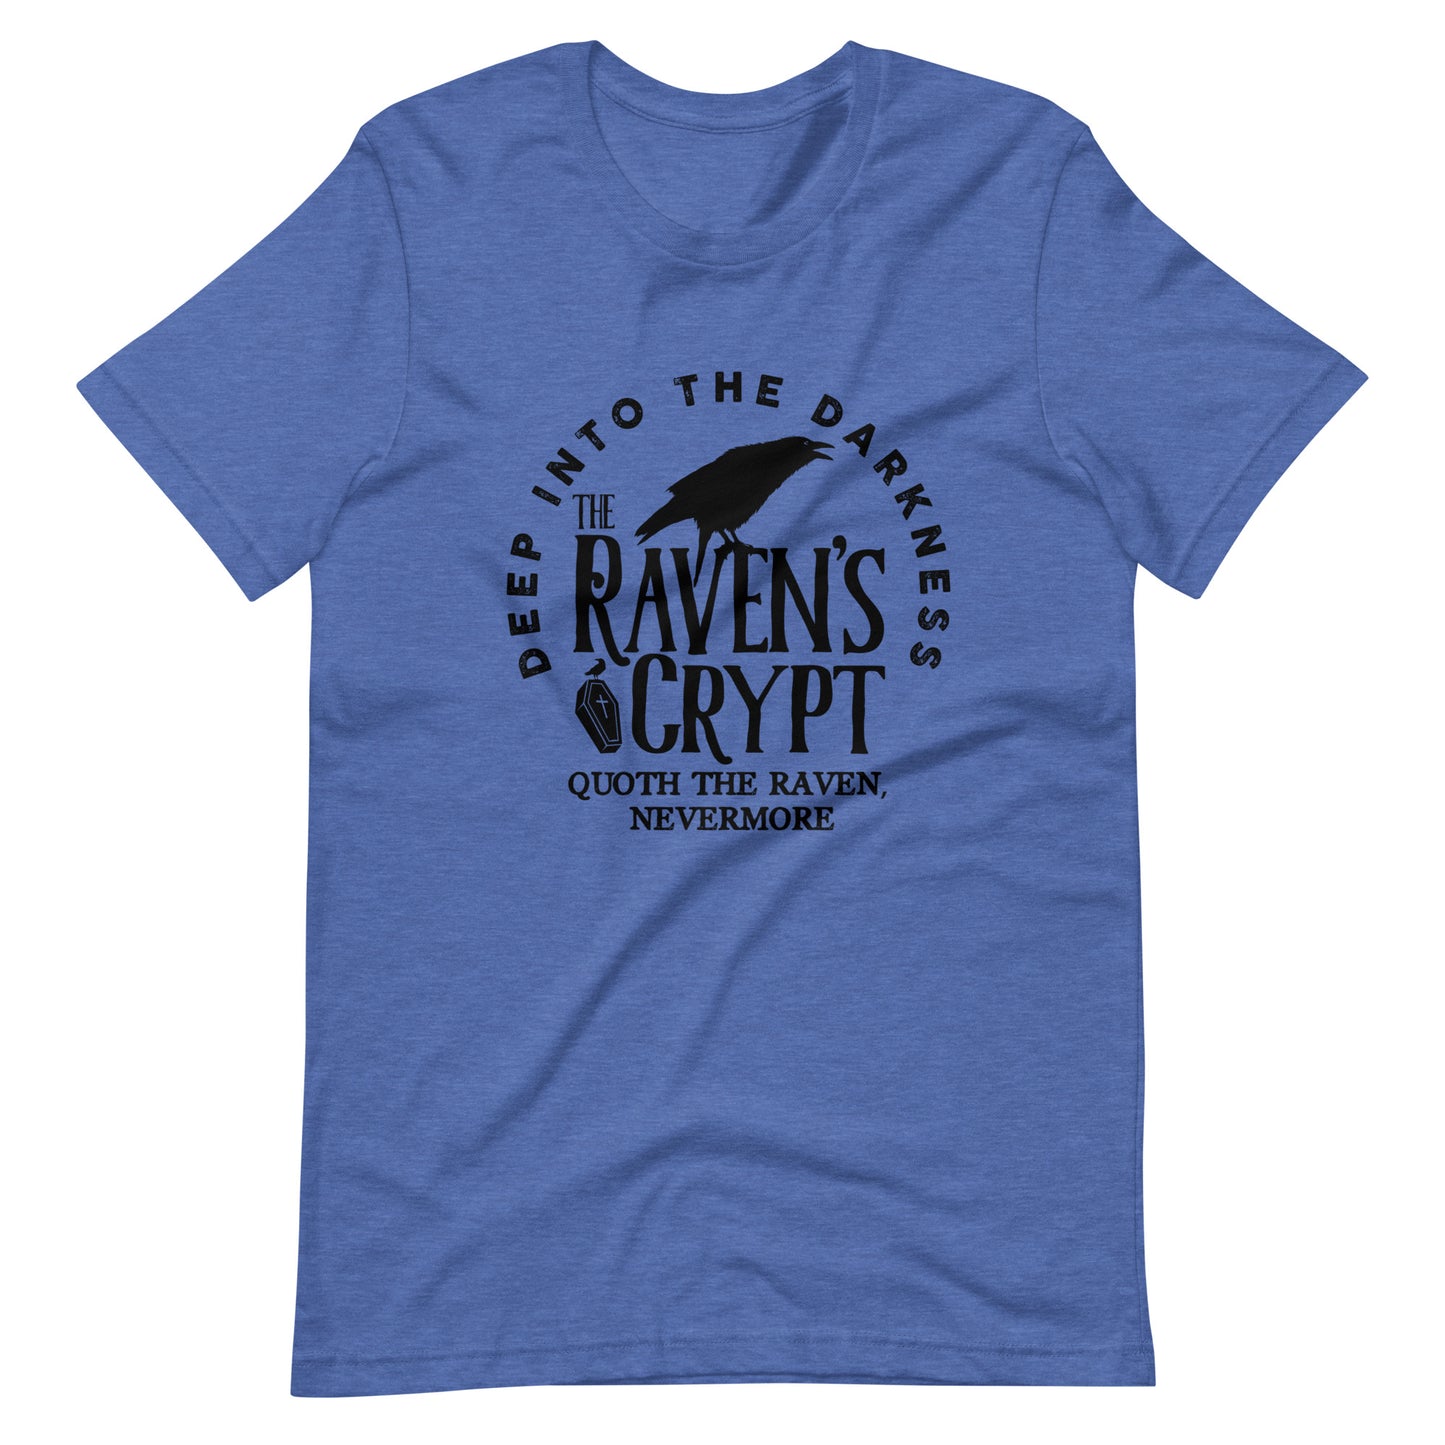 Deep Into the Darkness The Raven's Crypt - Men's t-shirt - Heather True Royal Front